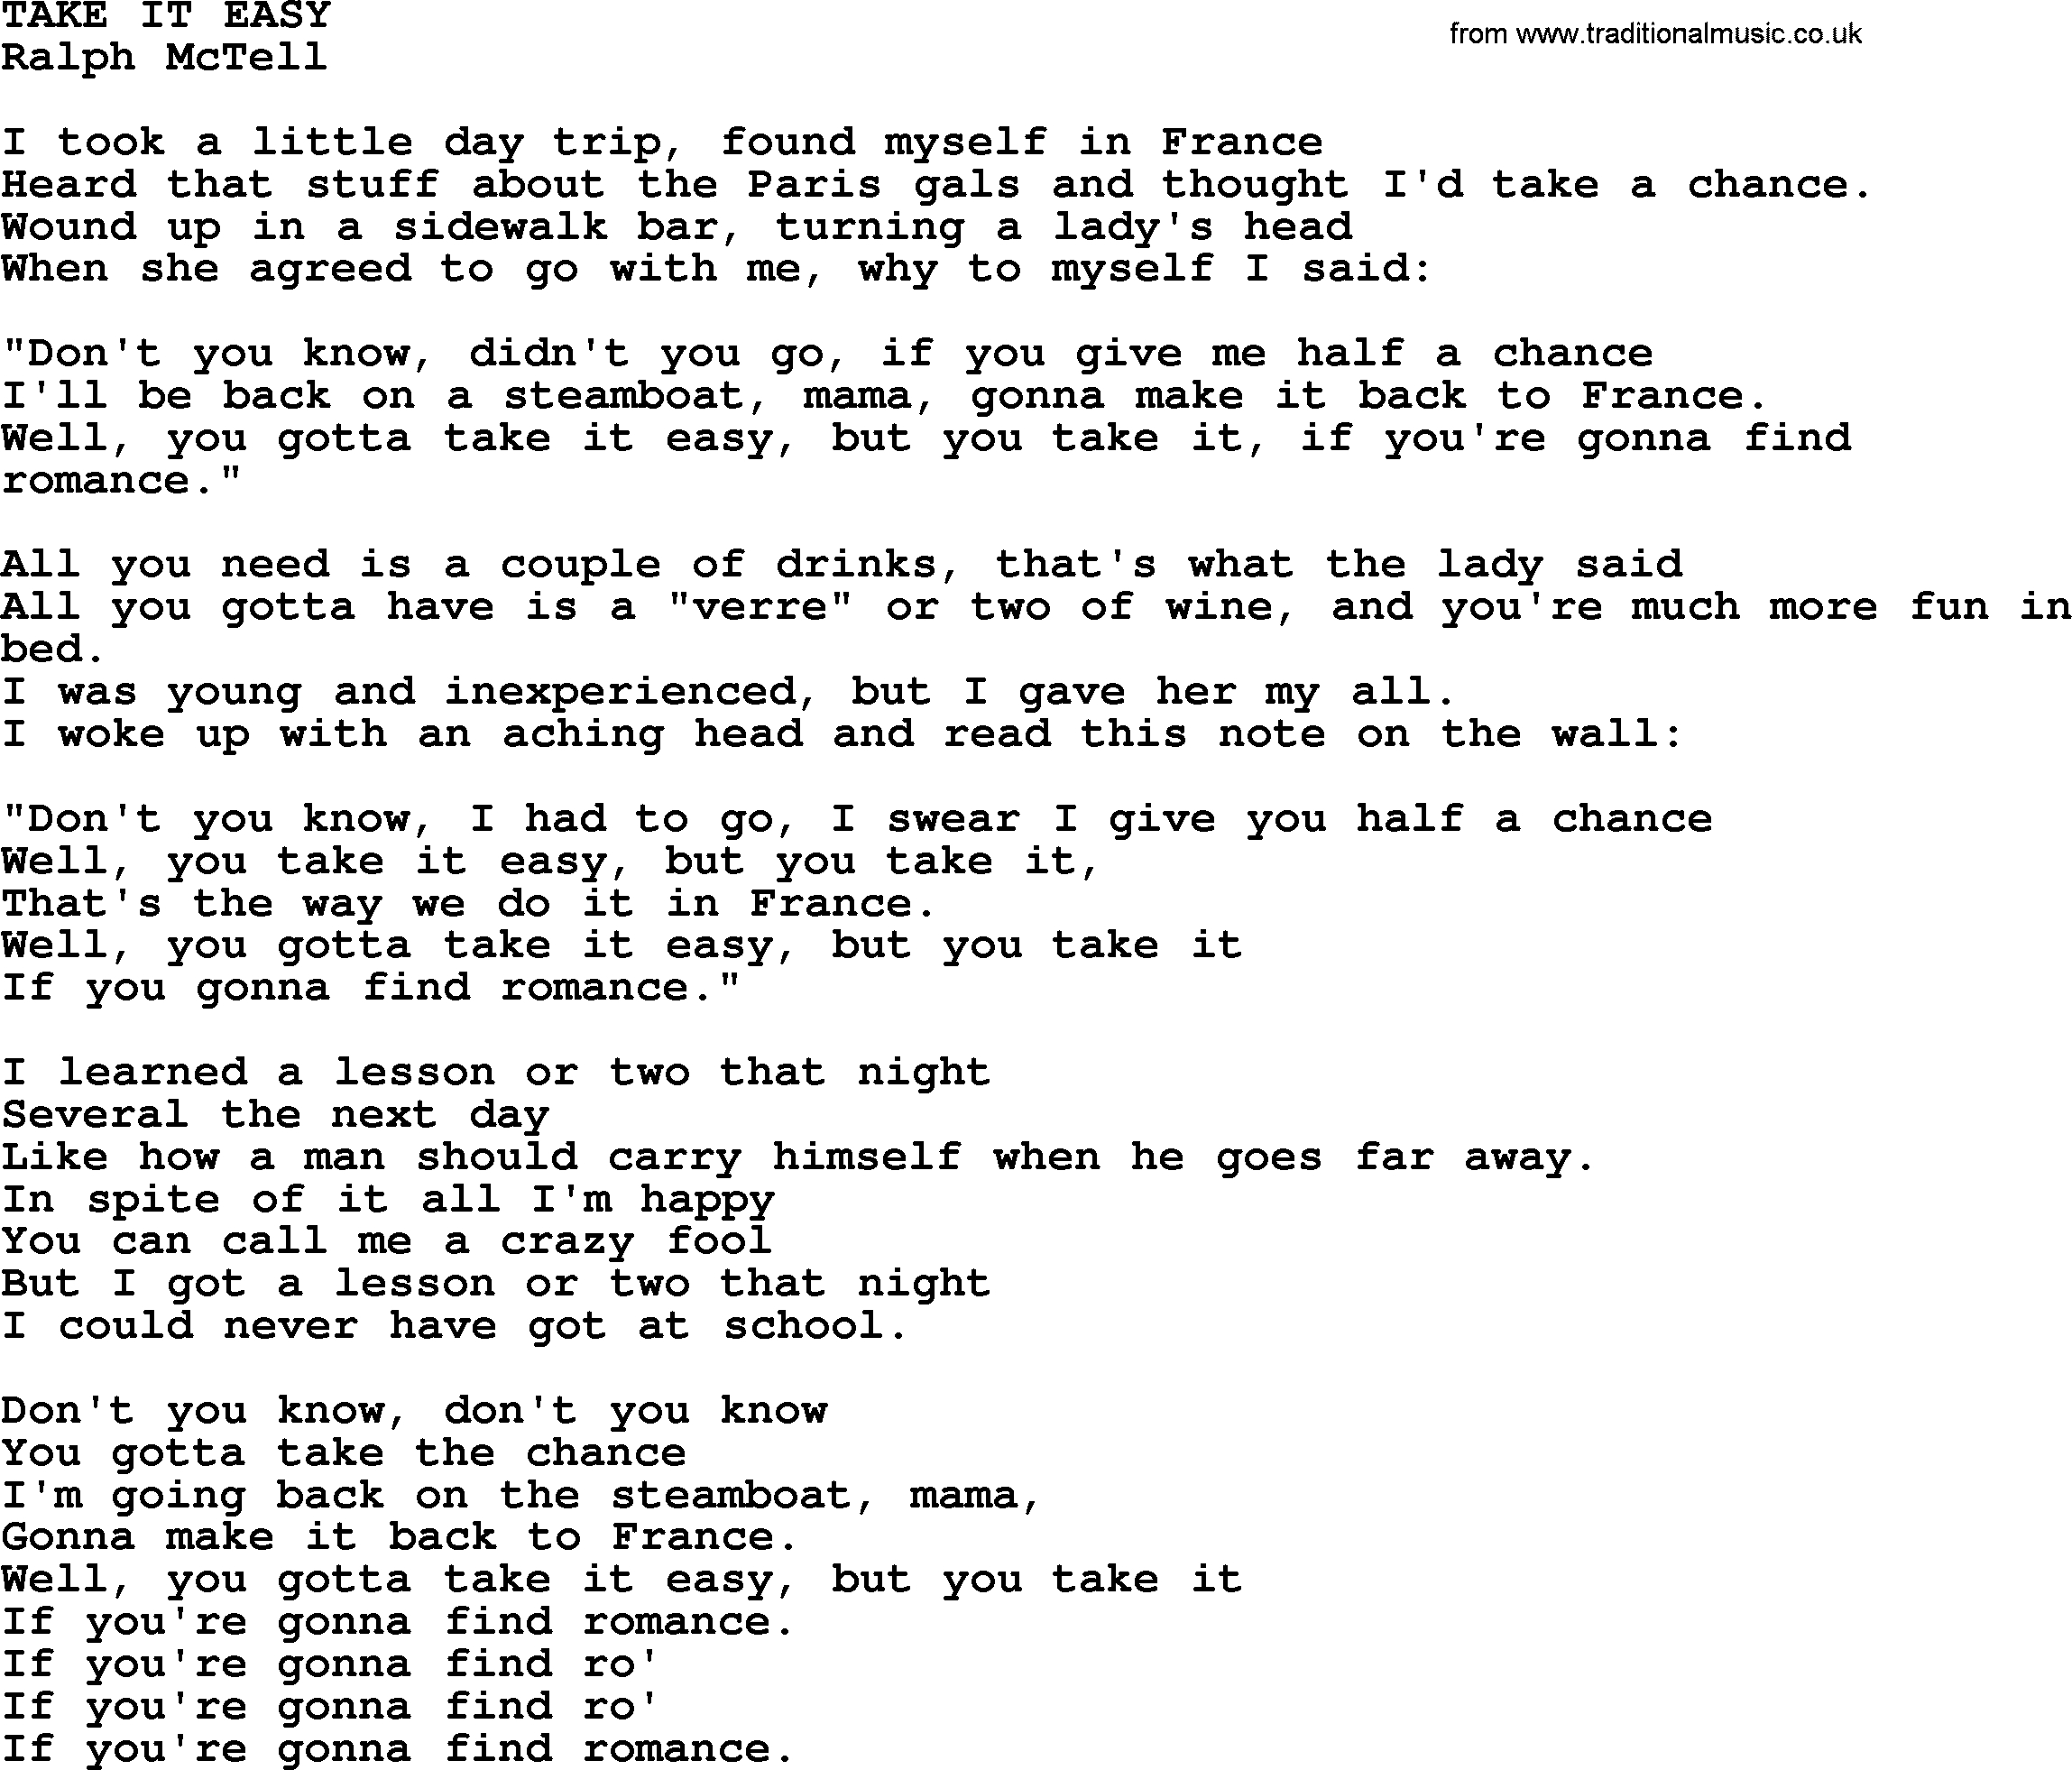 Take It Easy Chords Take It Easytxt Ralph Mctell Lyrics And Chords